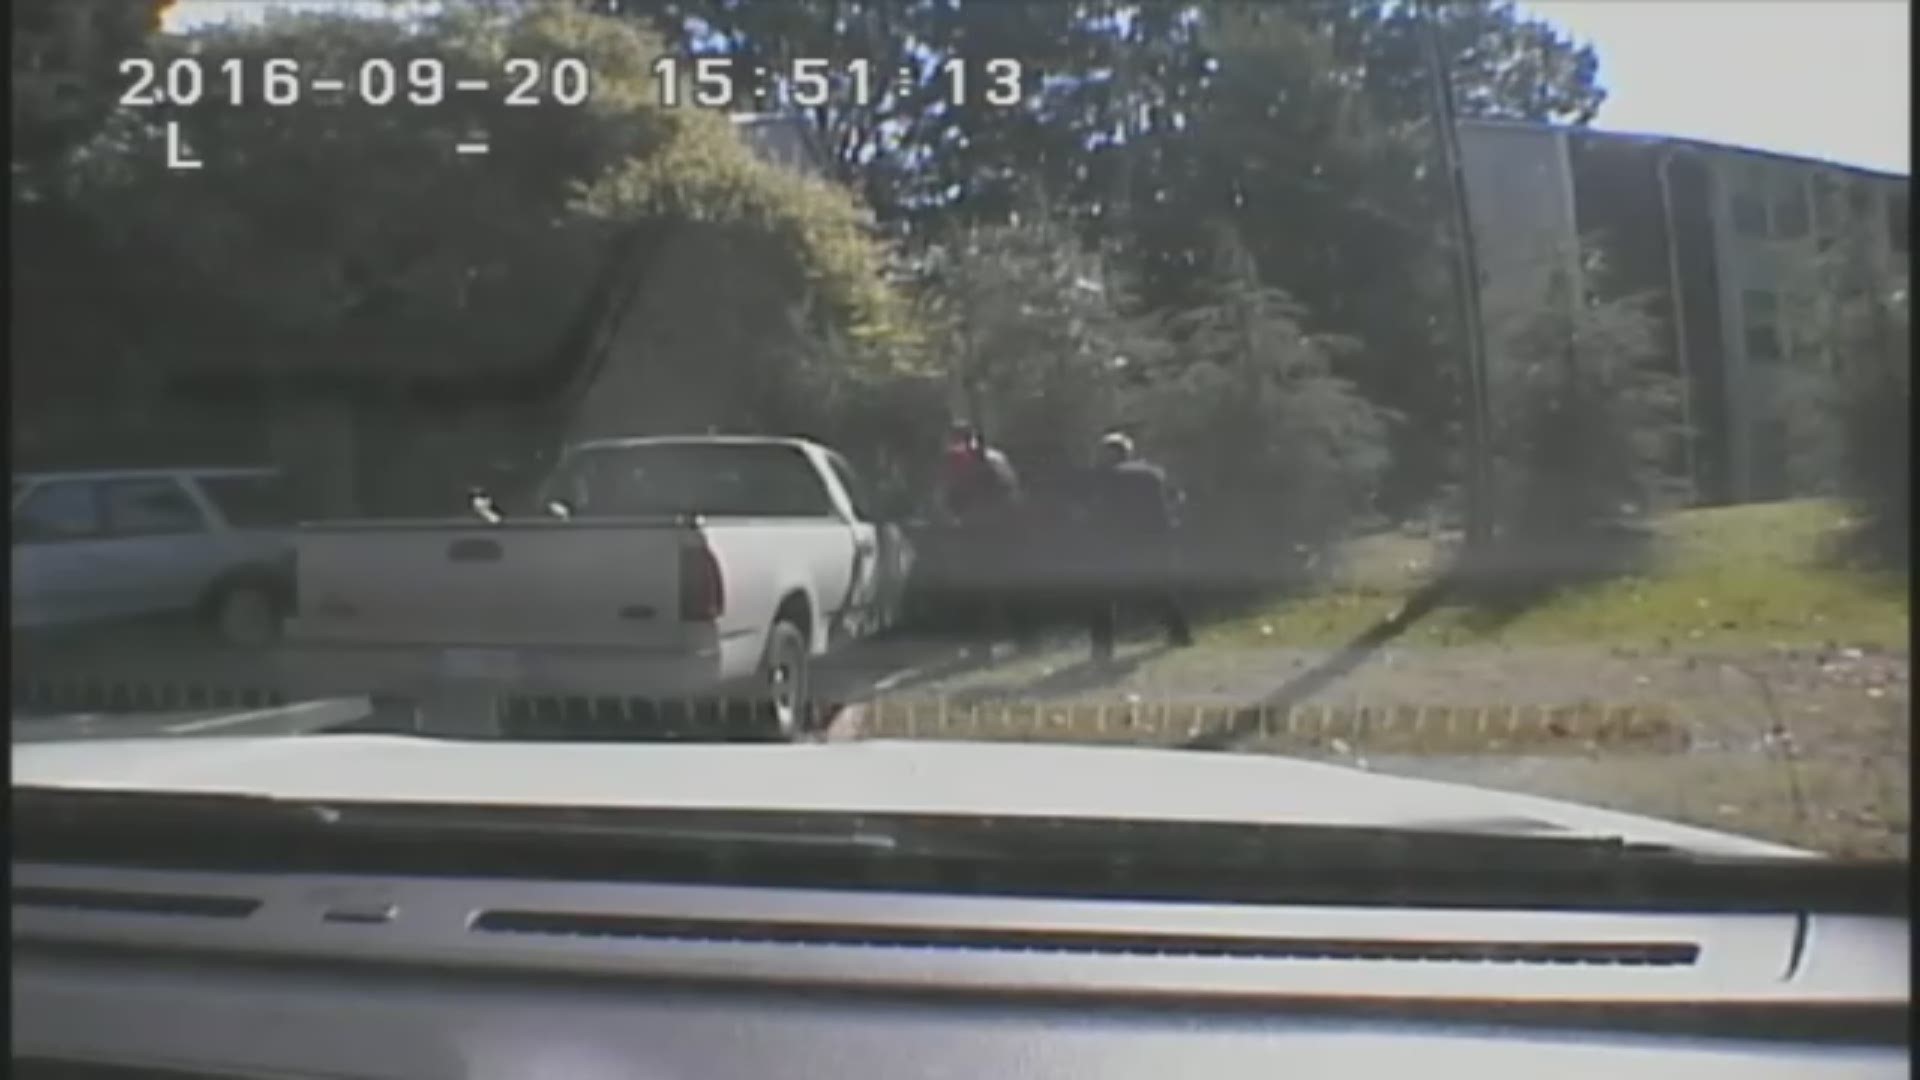 WARNING: GRAPHIC VIDEO: The Charlotte-Mecklenburg Police Department released the dash cam video of the Keith Scott shooting.